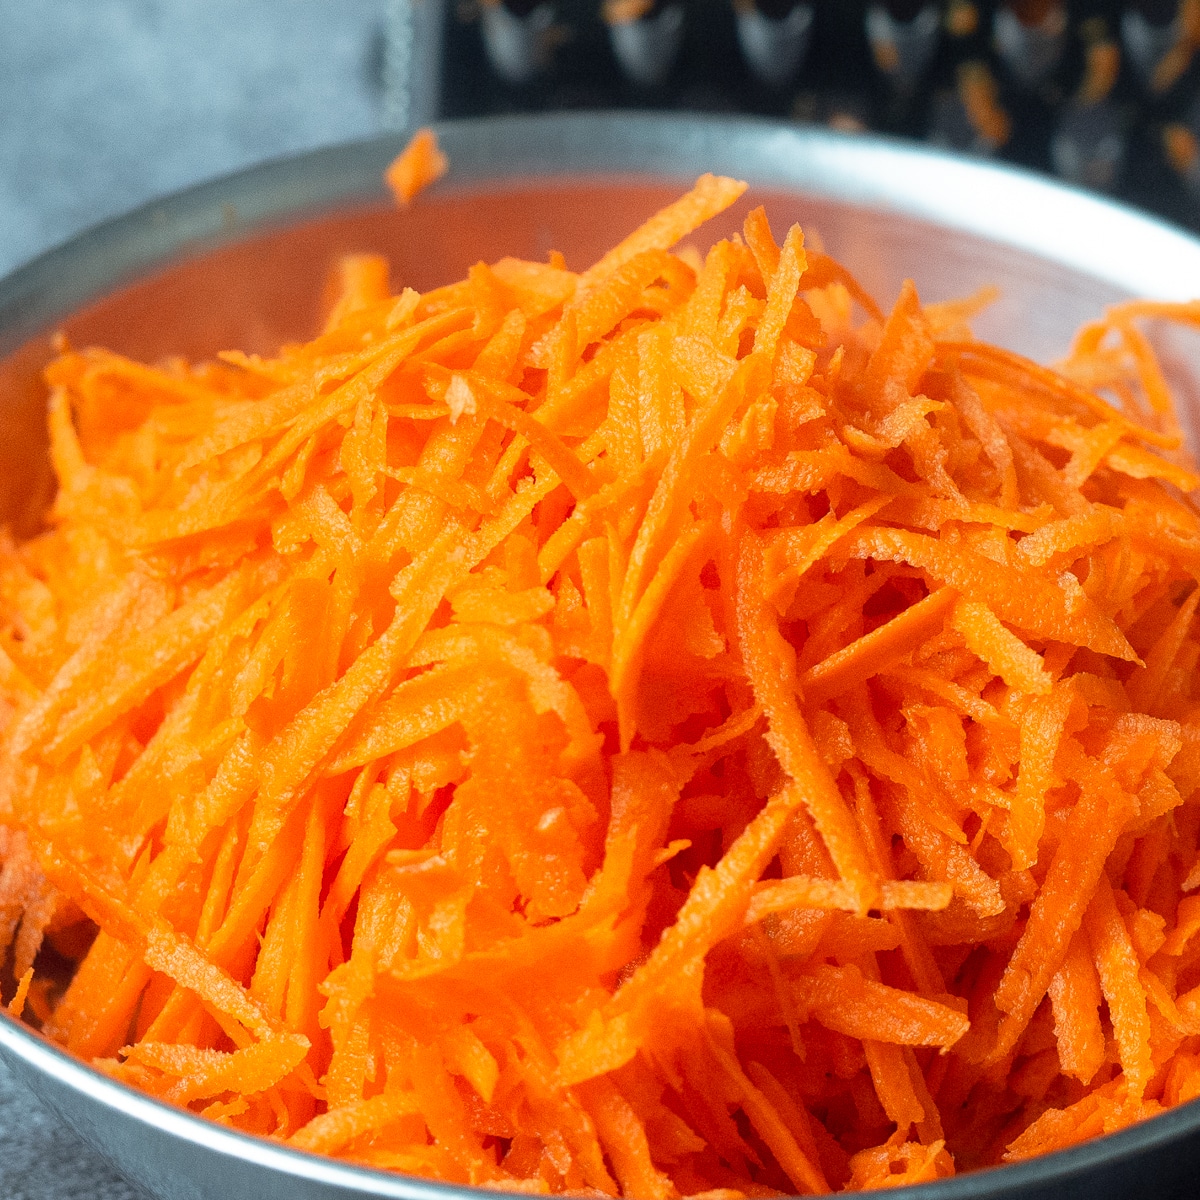 Grated carrots place in an aluminum bowl.